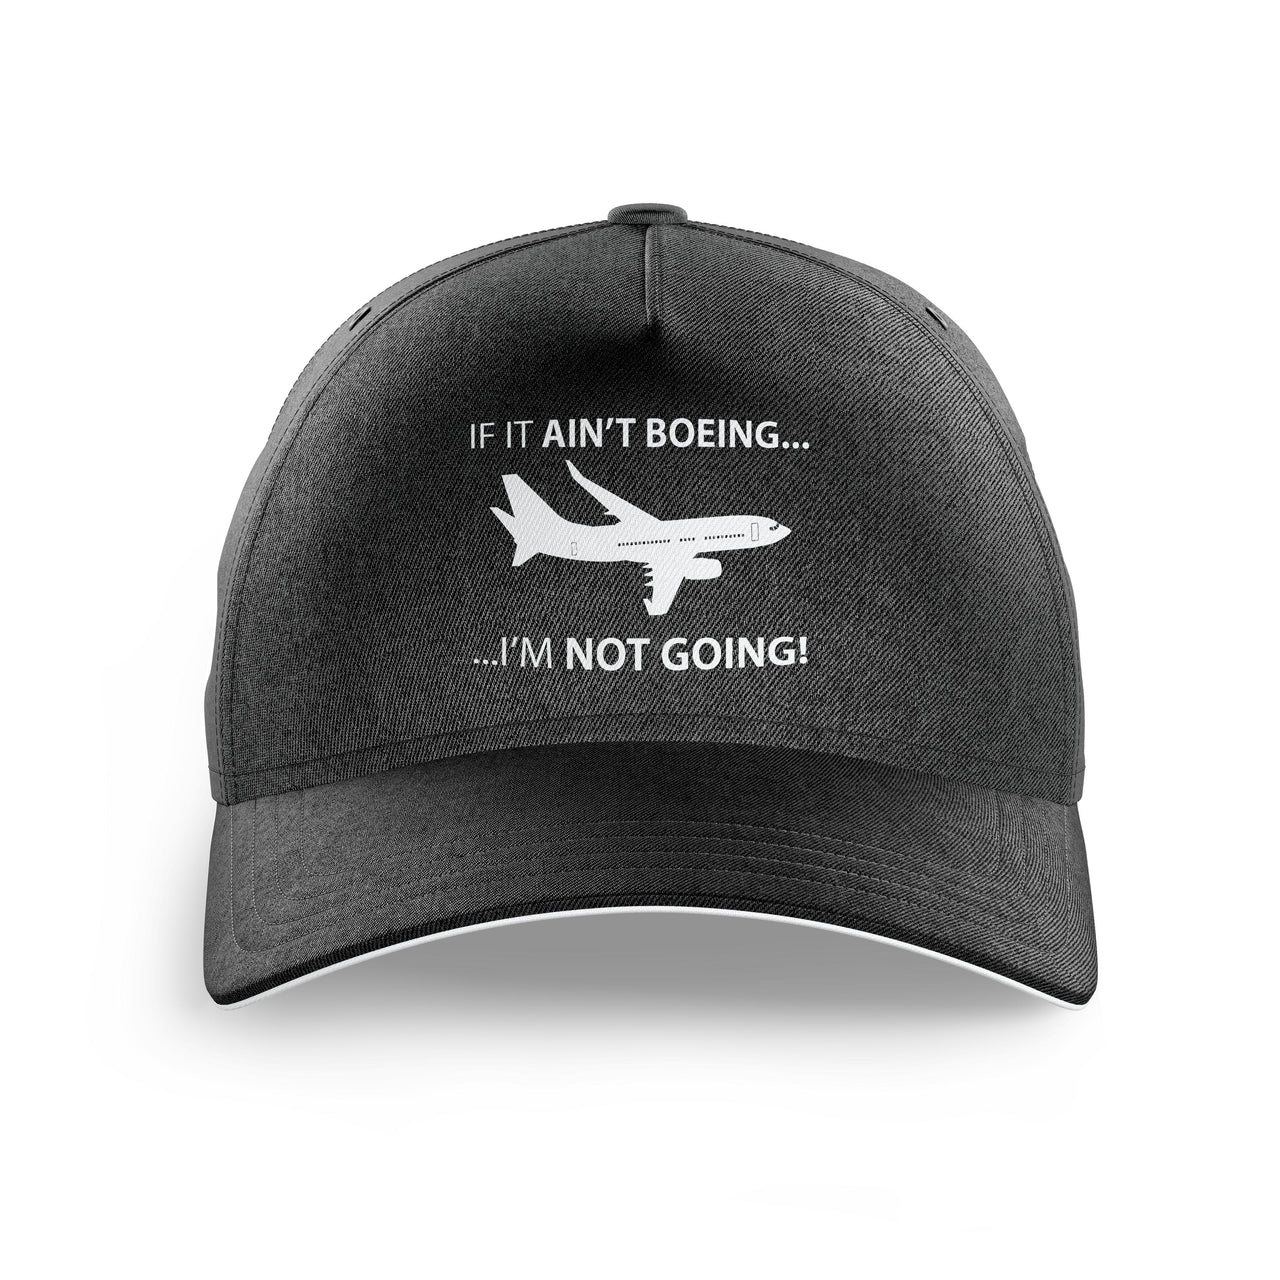 If It Ain't Boeing I'm Not Going! Printed Hats